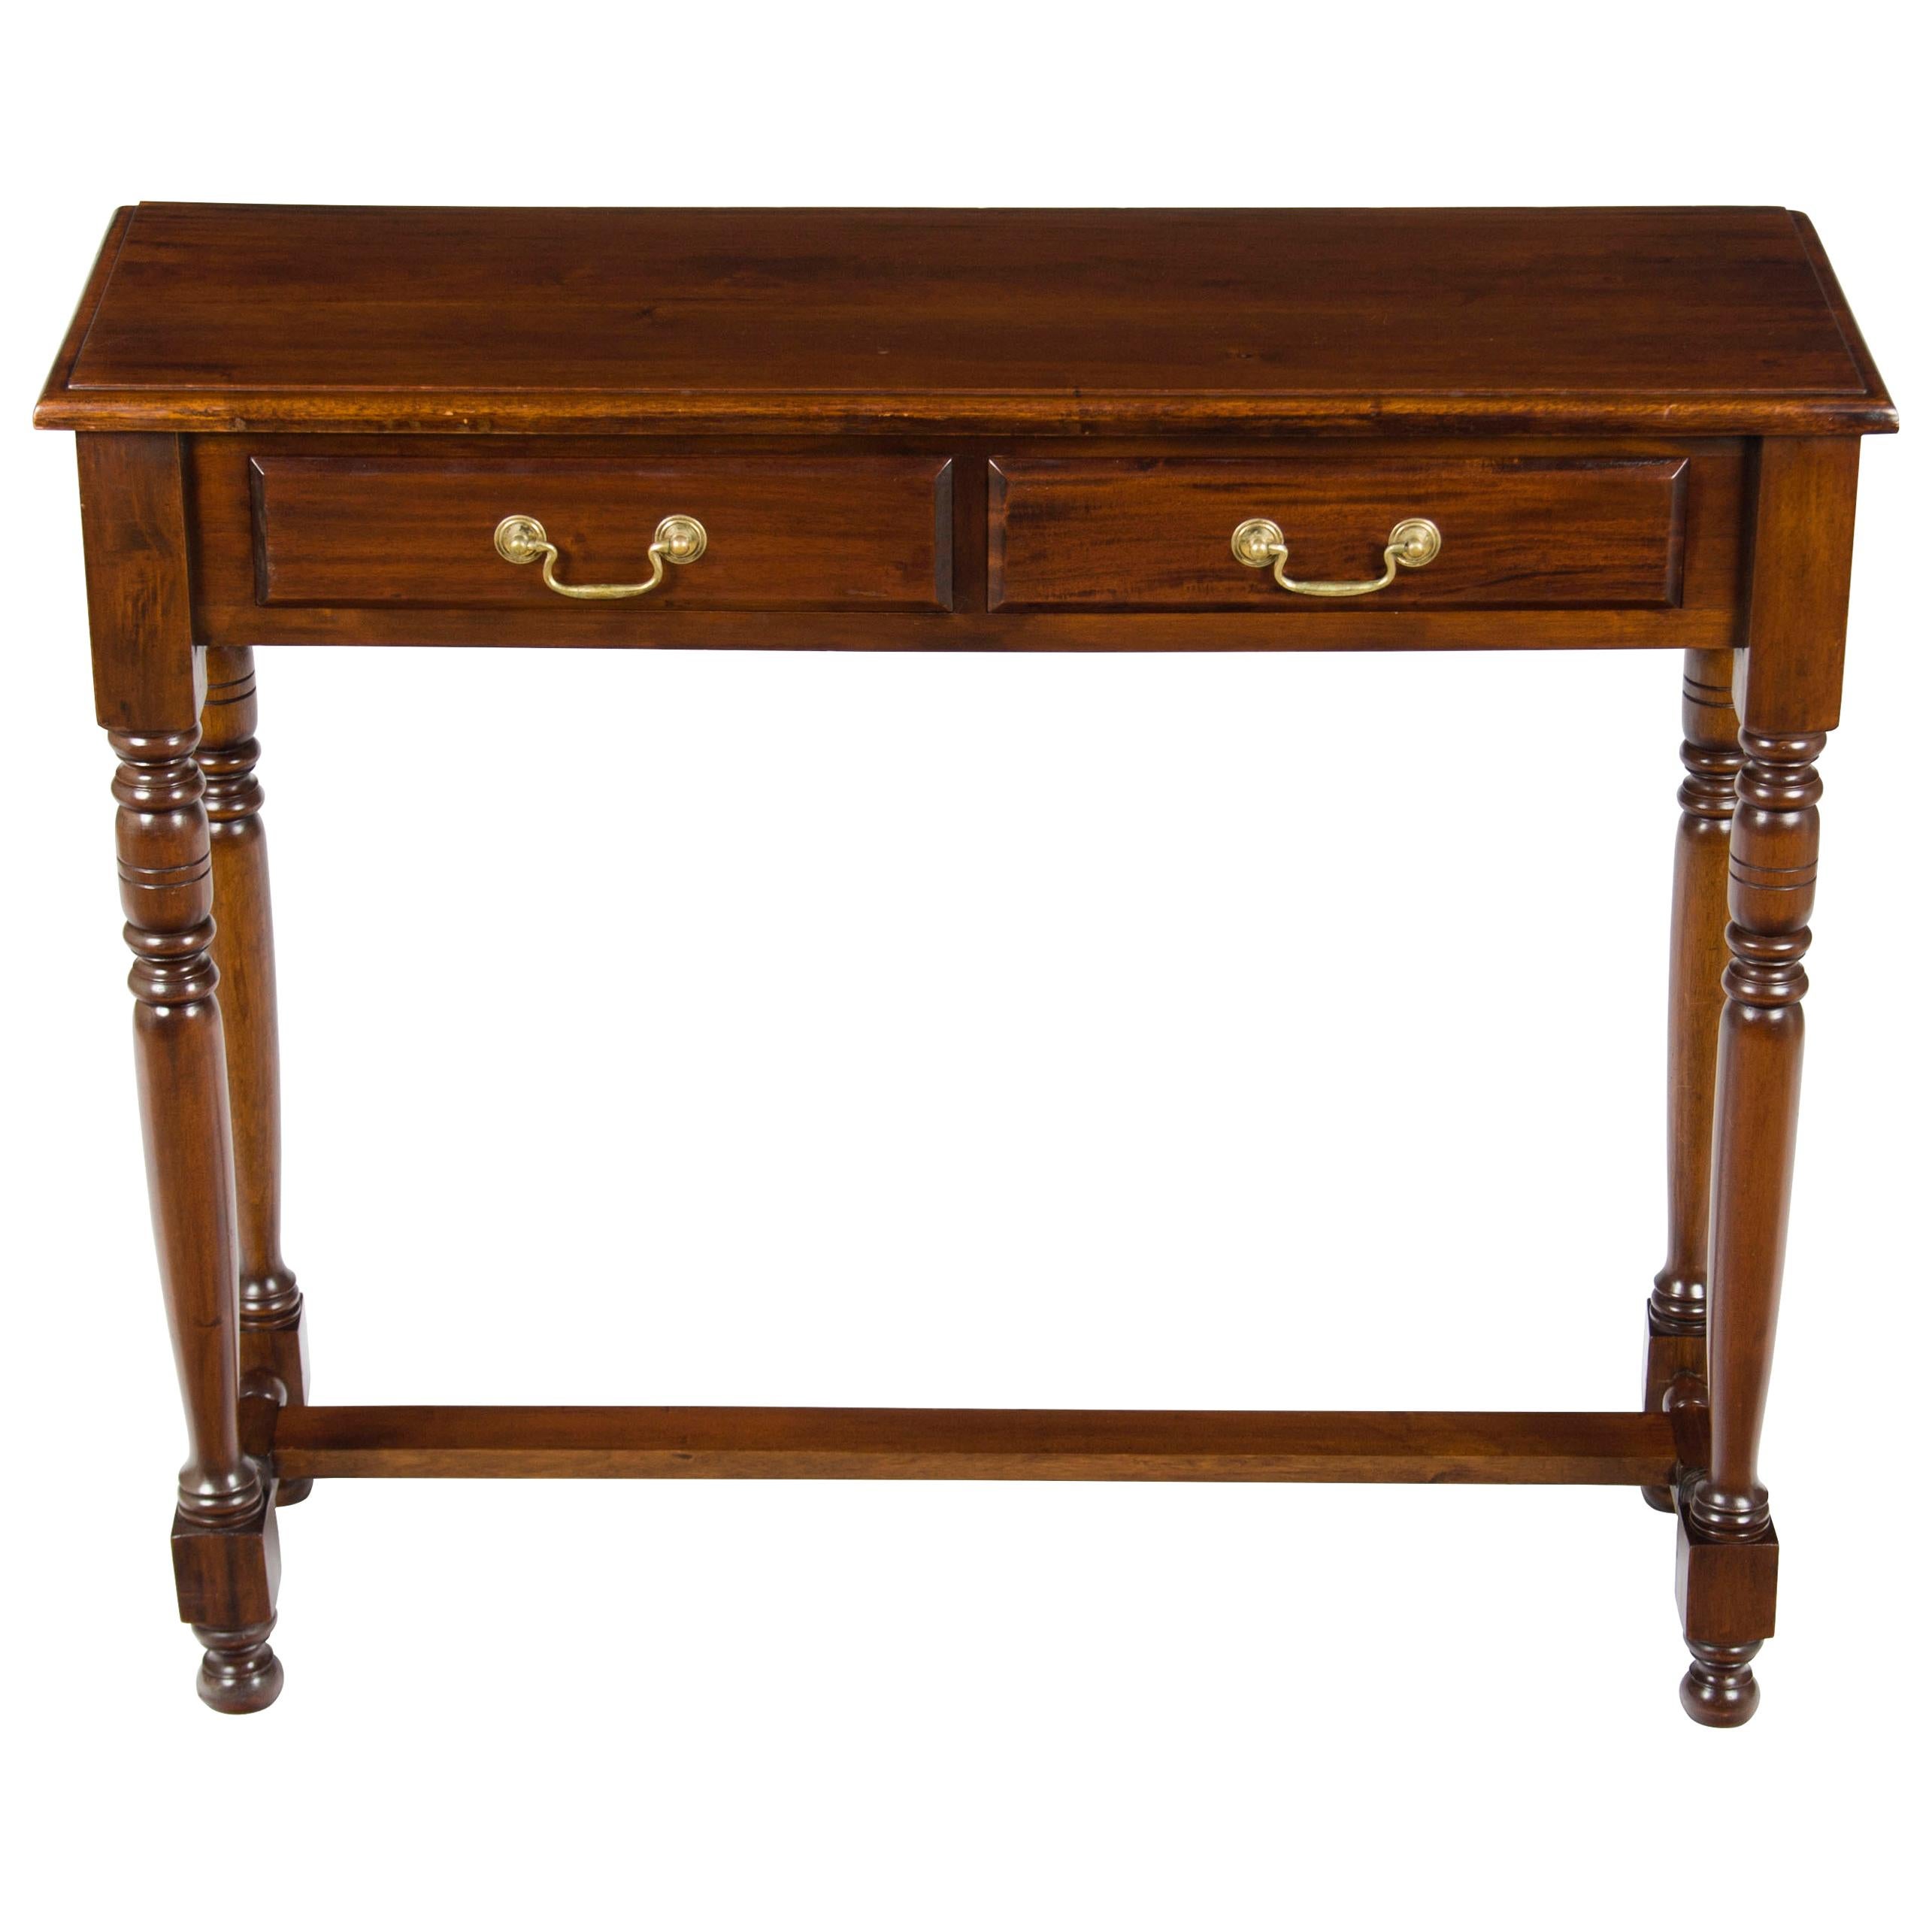 Mahogany Narrow Tall Sofa Console Table with Drawers For Sale